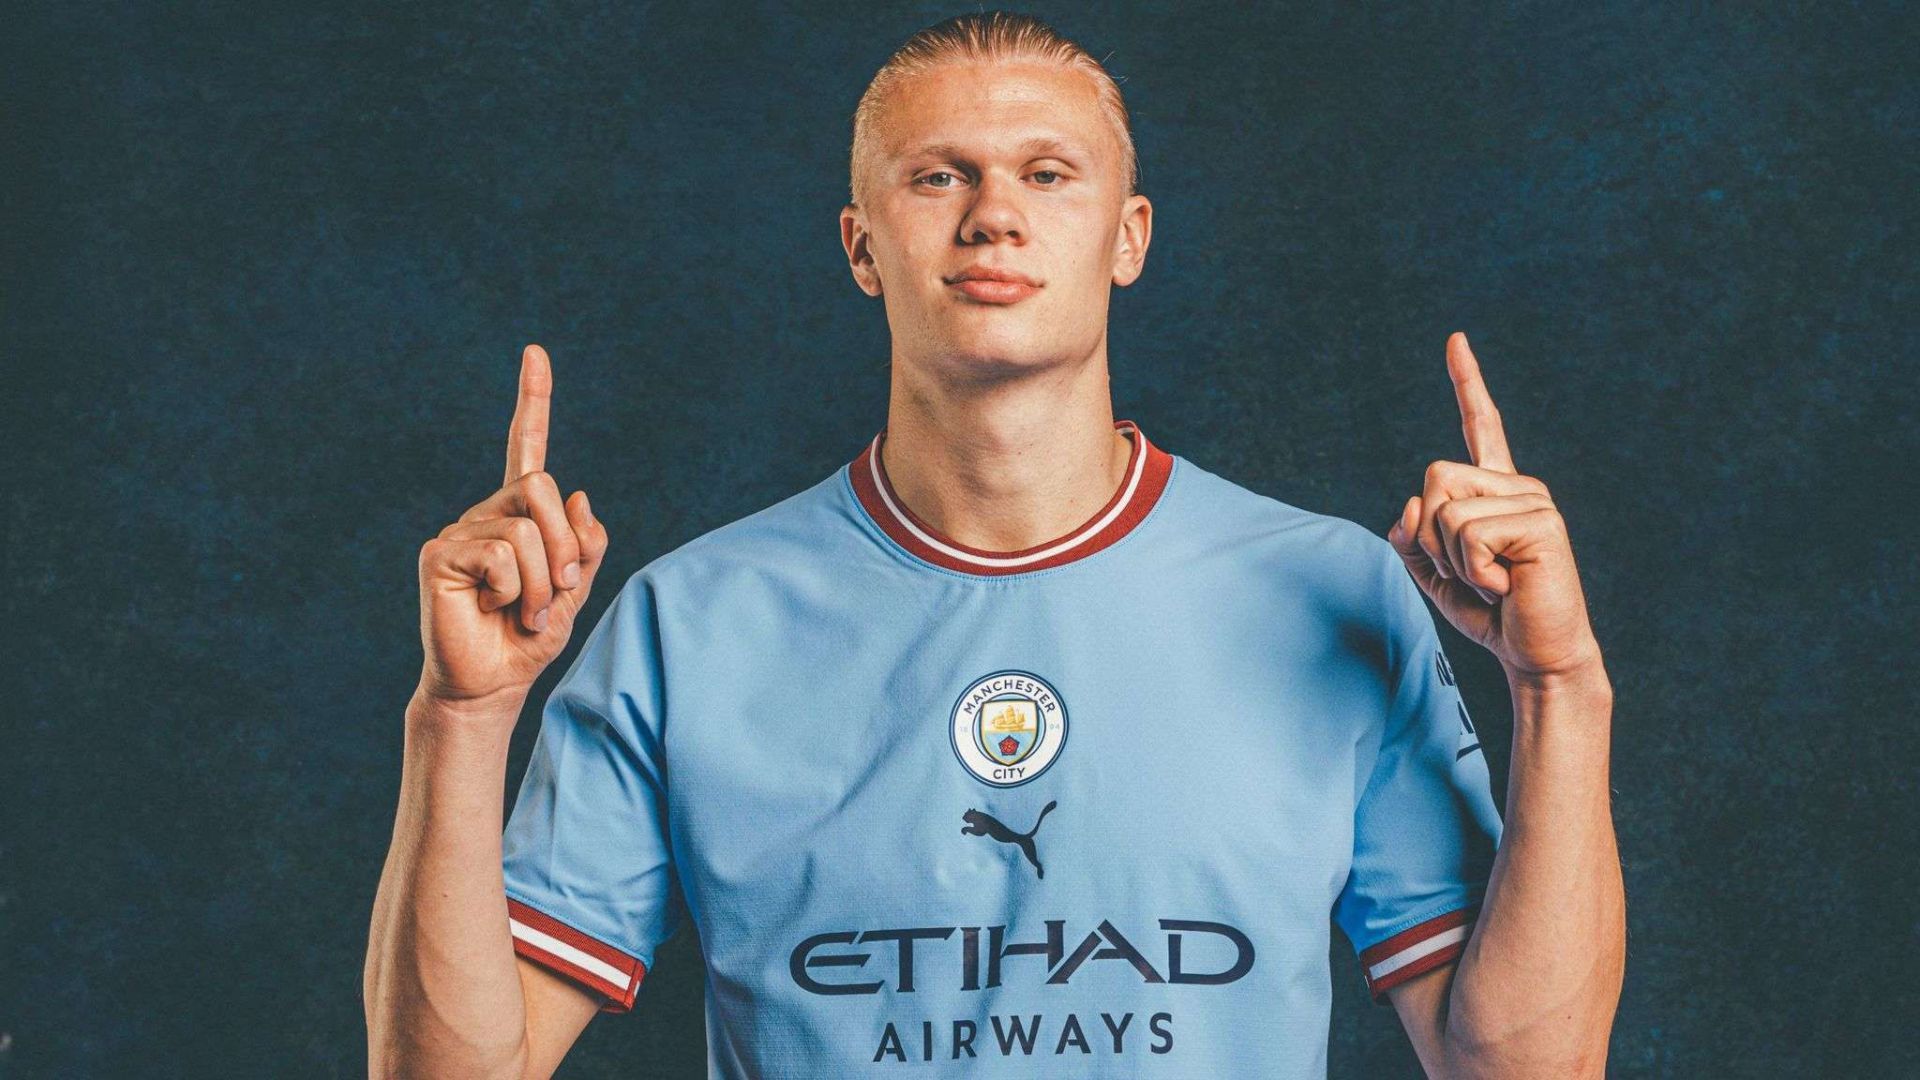 Erling Haaland will play a key role for Manchester City next season